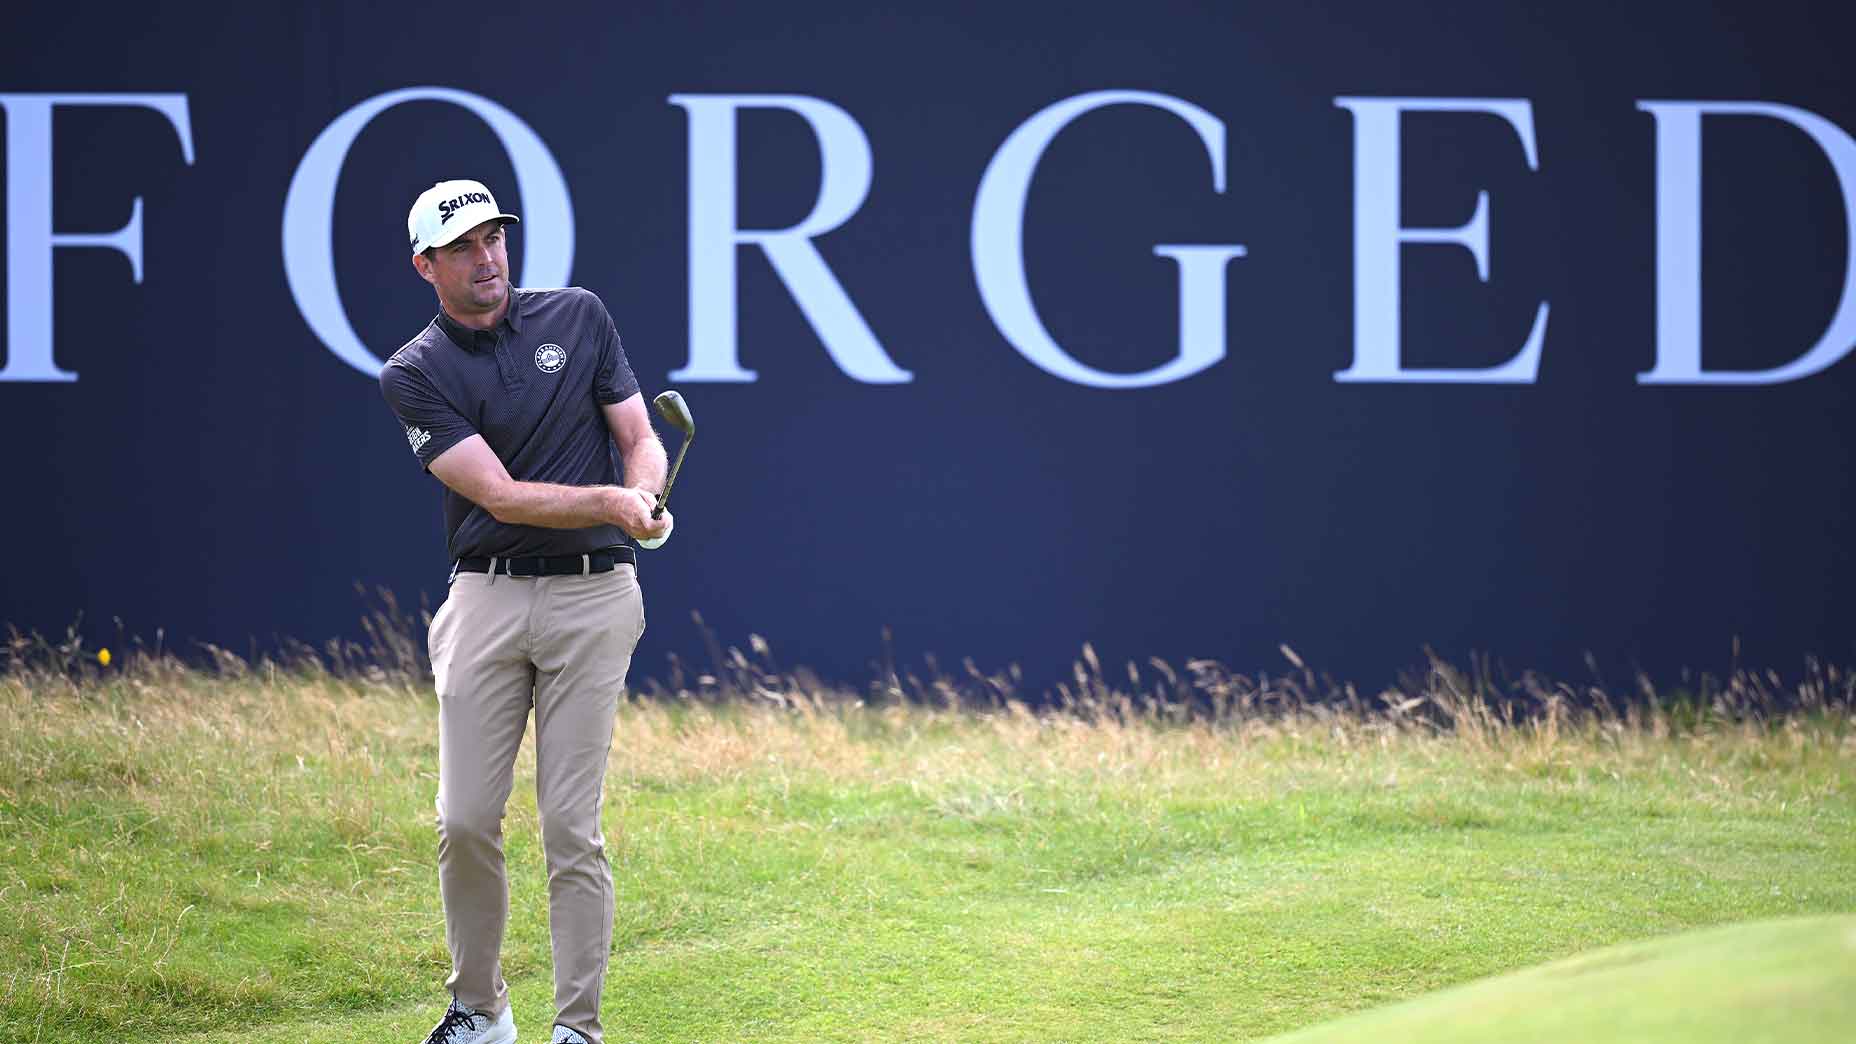 keegan bradley hits a chip in front of an Open Championship 'forged' sign